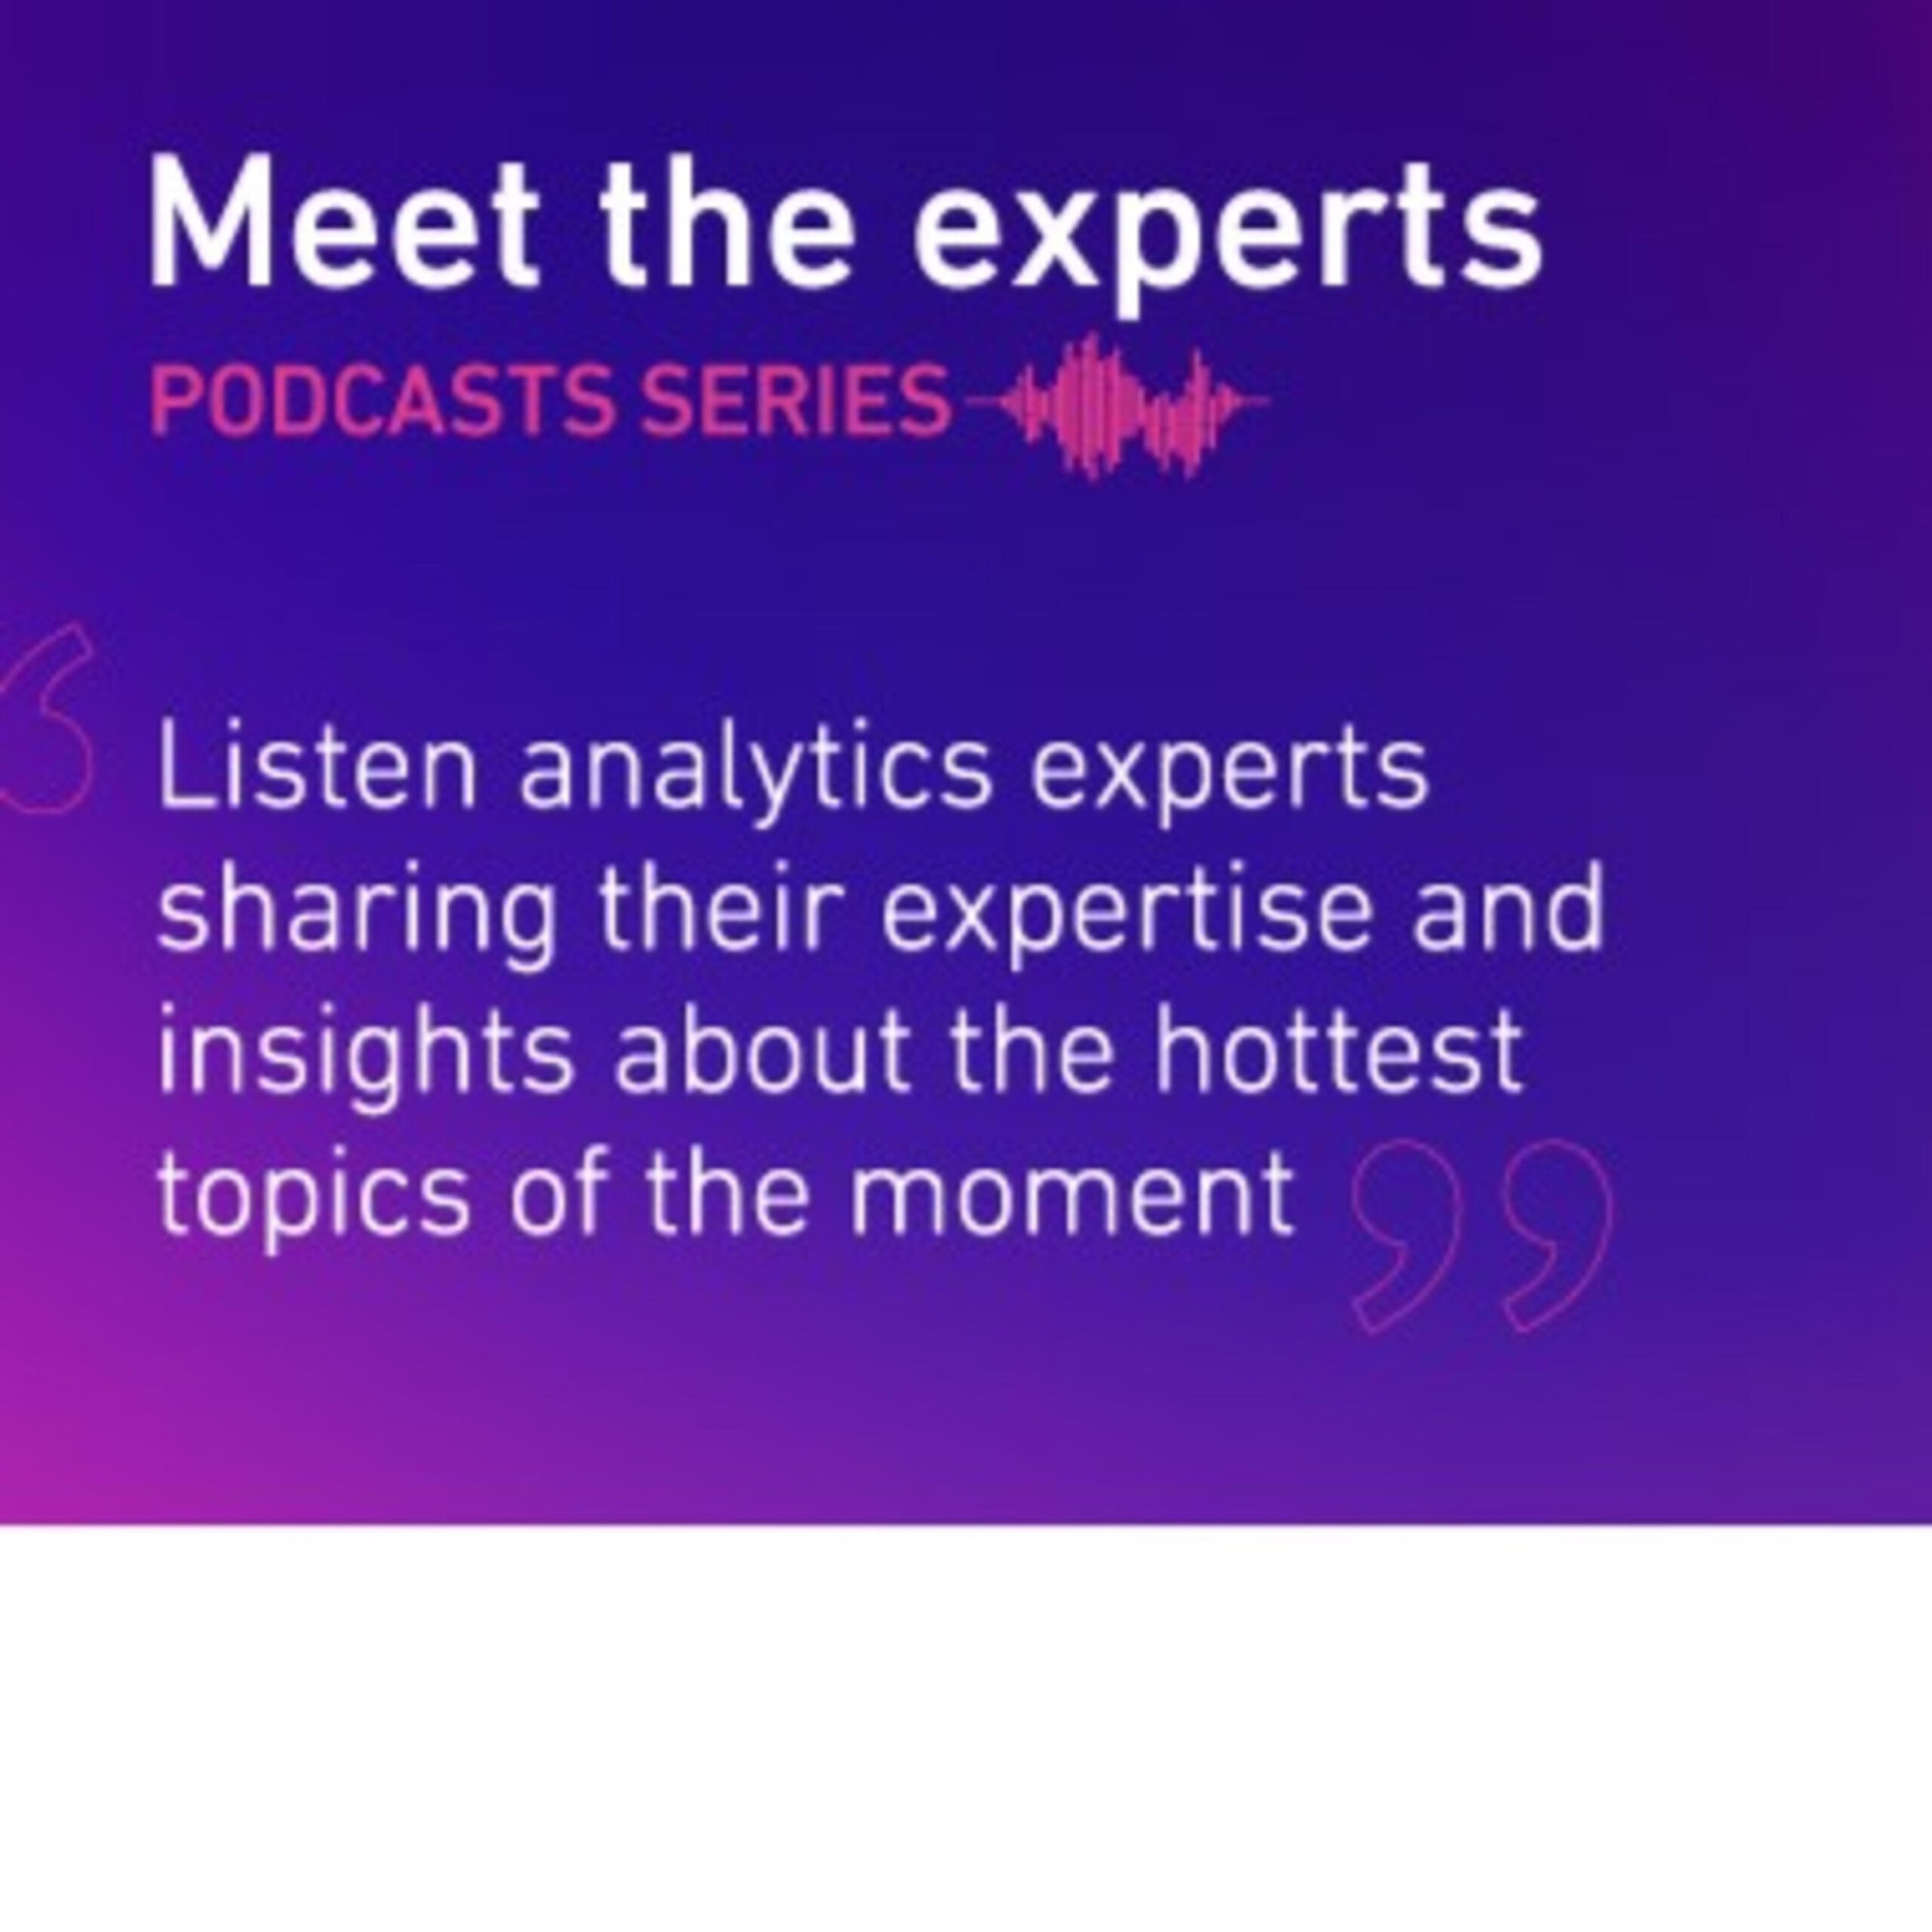 Experian Podcast Series